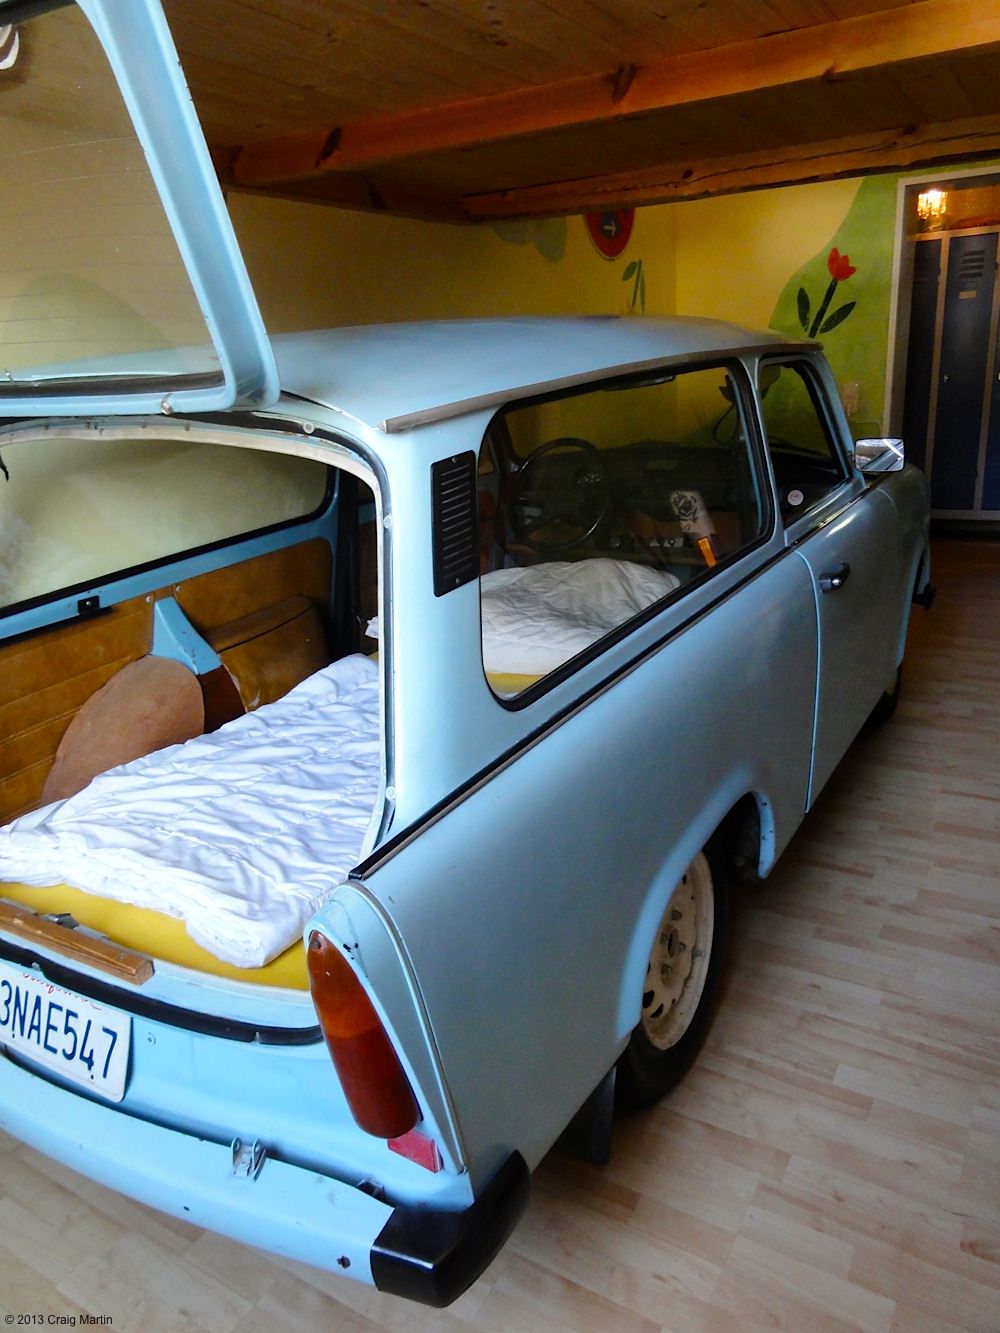 I wasn't joking about the car... We stayed in the Hostel Lollis with a Trabant for a bed.